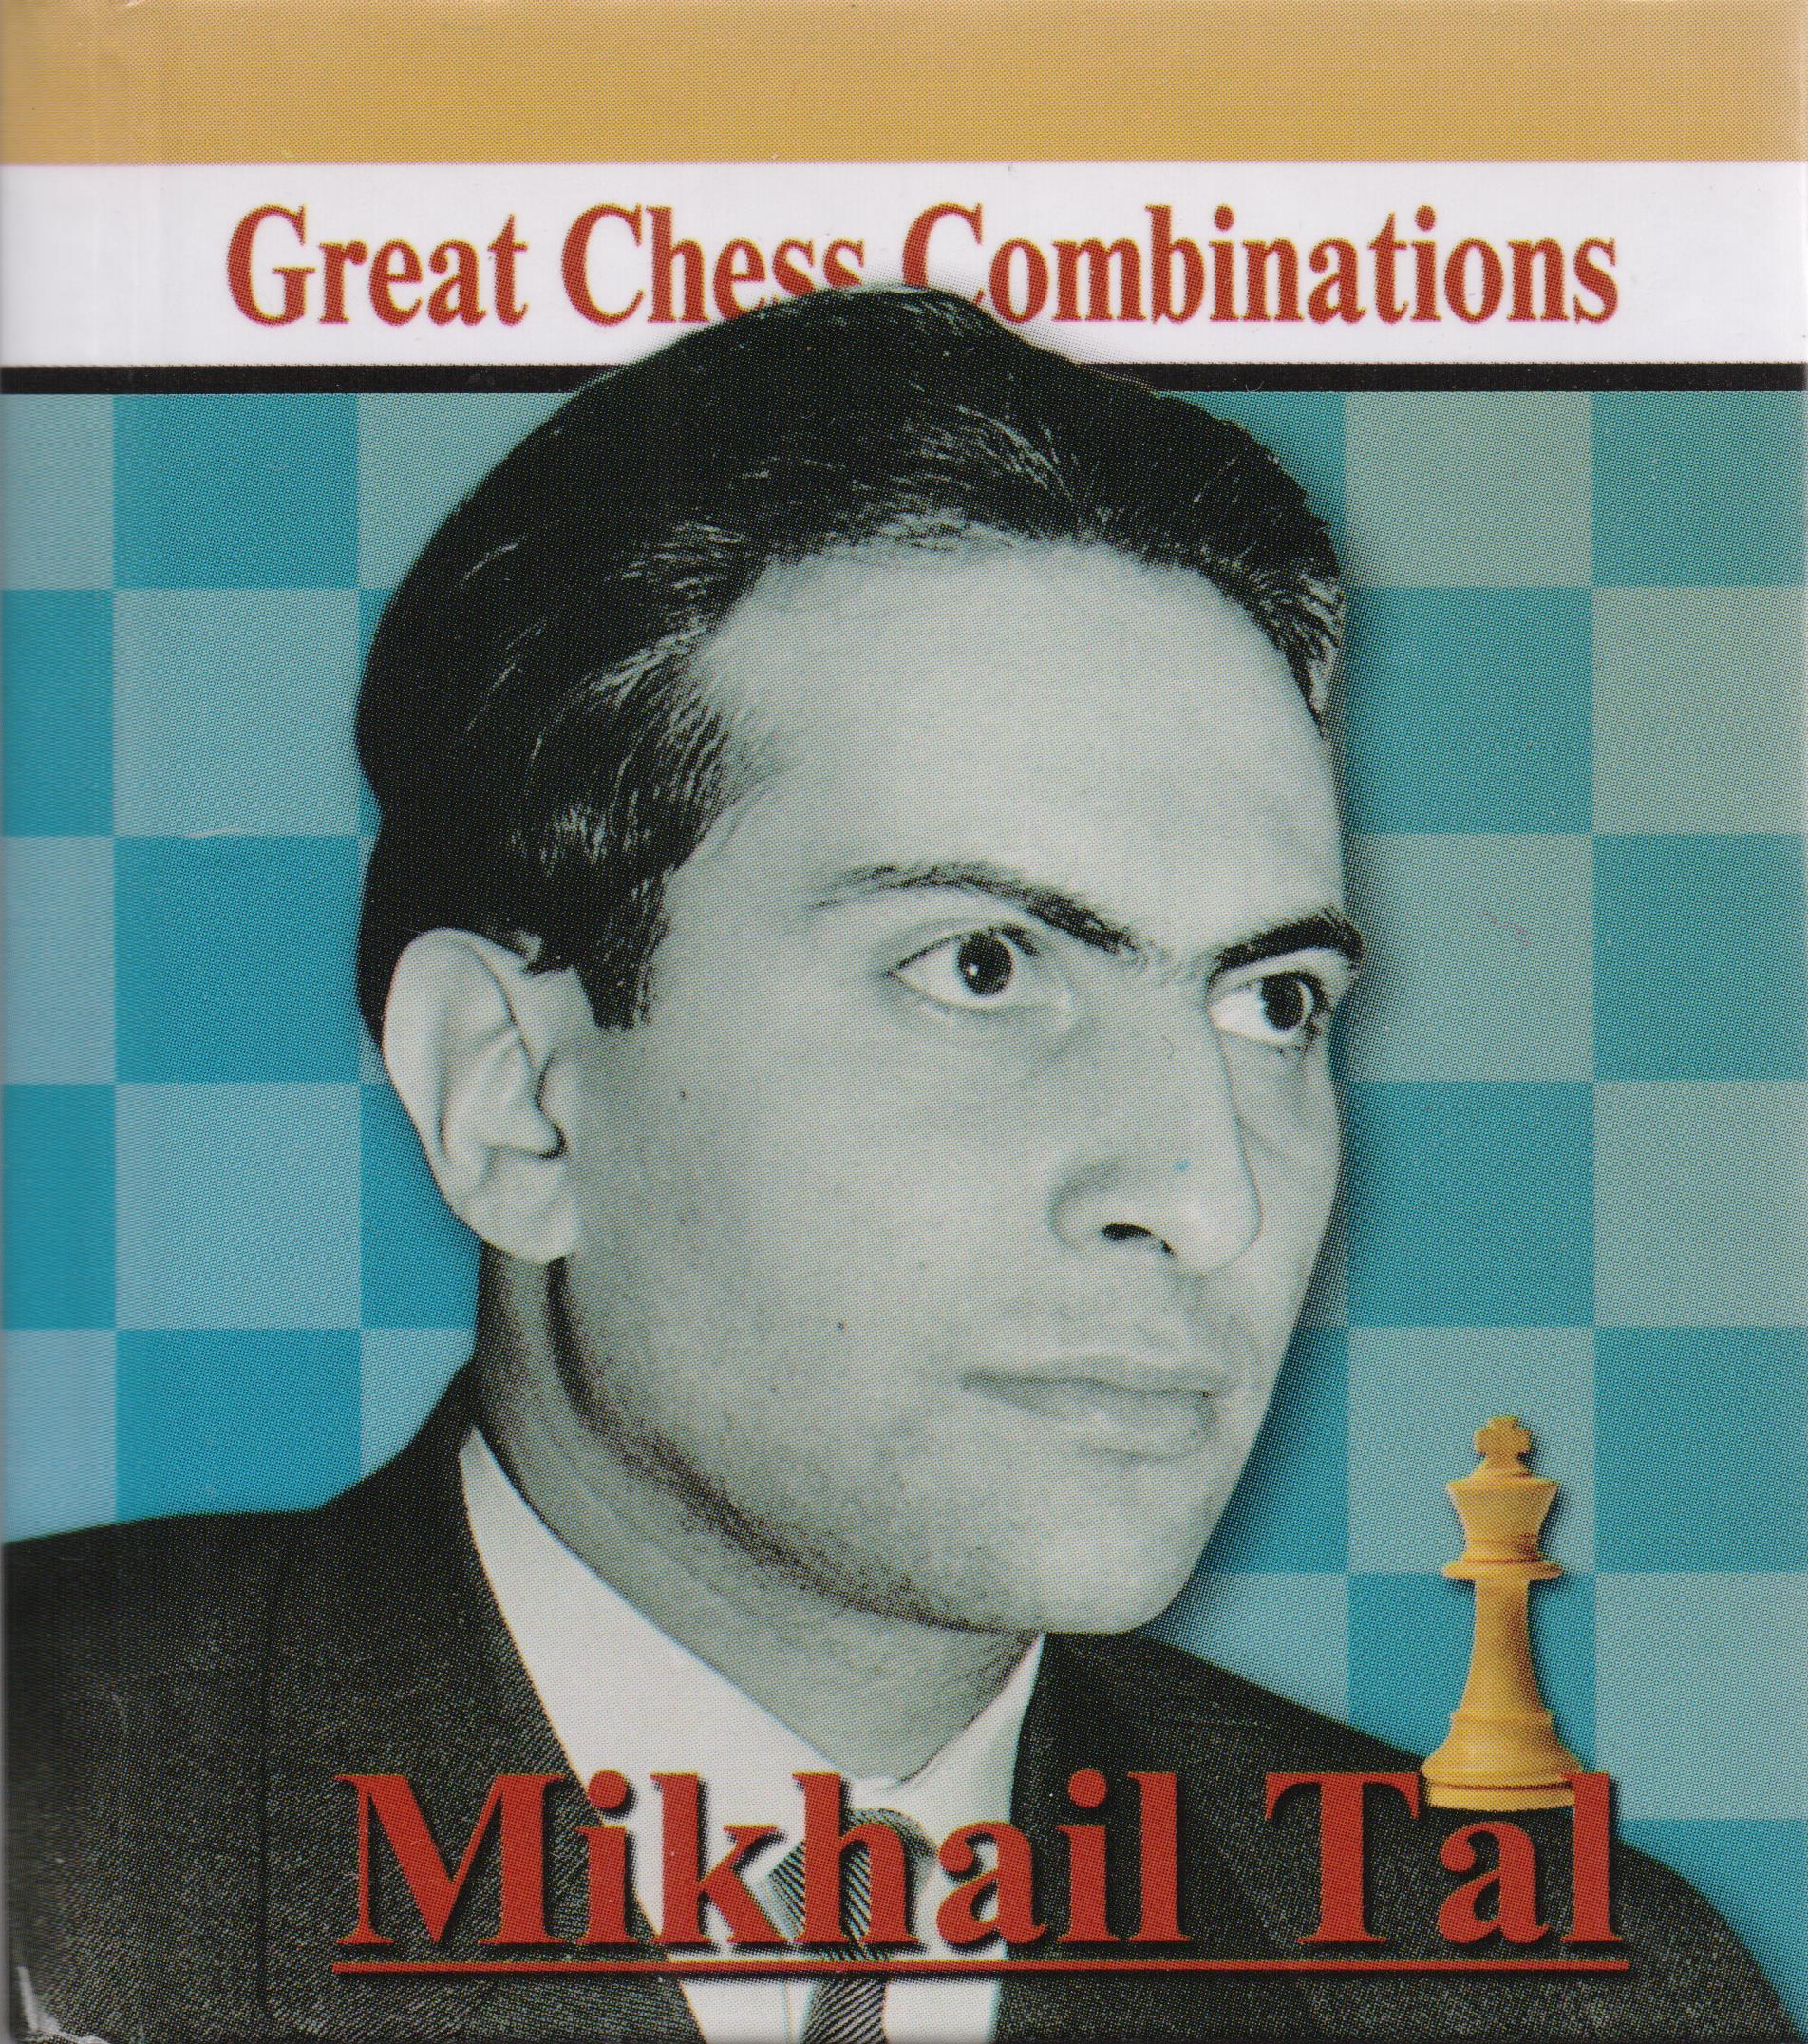 Tactics Training - Mikhail Tal: How to improve your Chess with